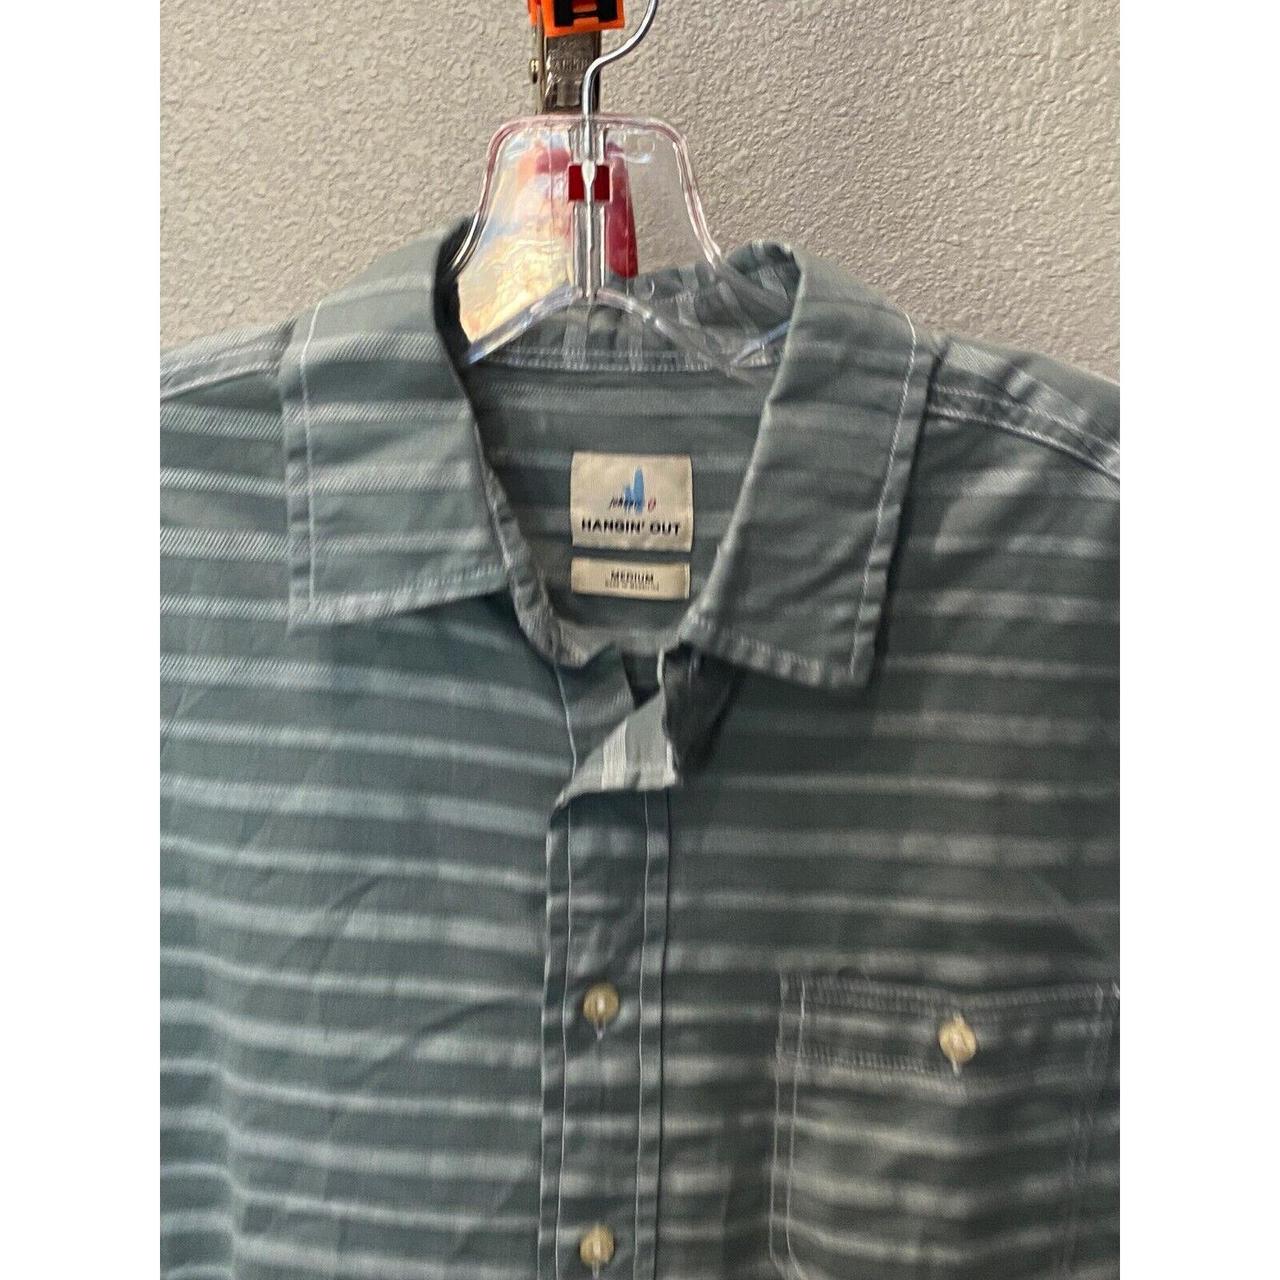 Johnnie O Hanging Out Stripe SHORT SLEEVE BUTTON UP... - Depop